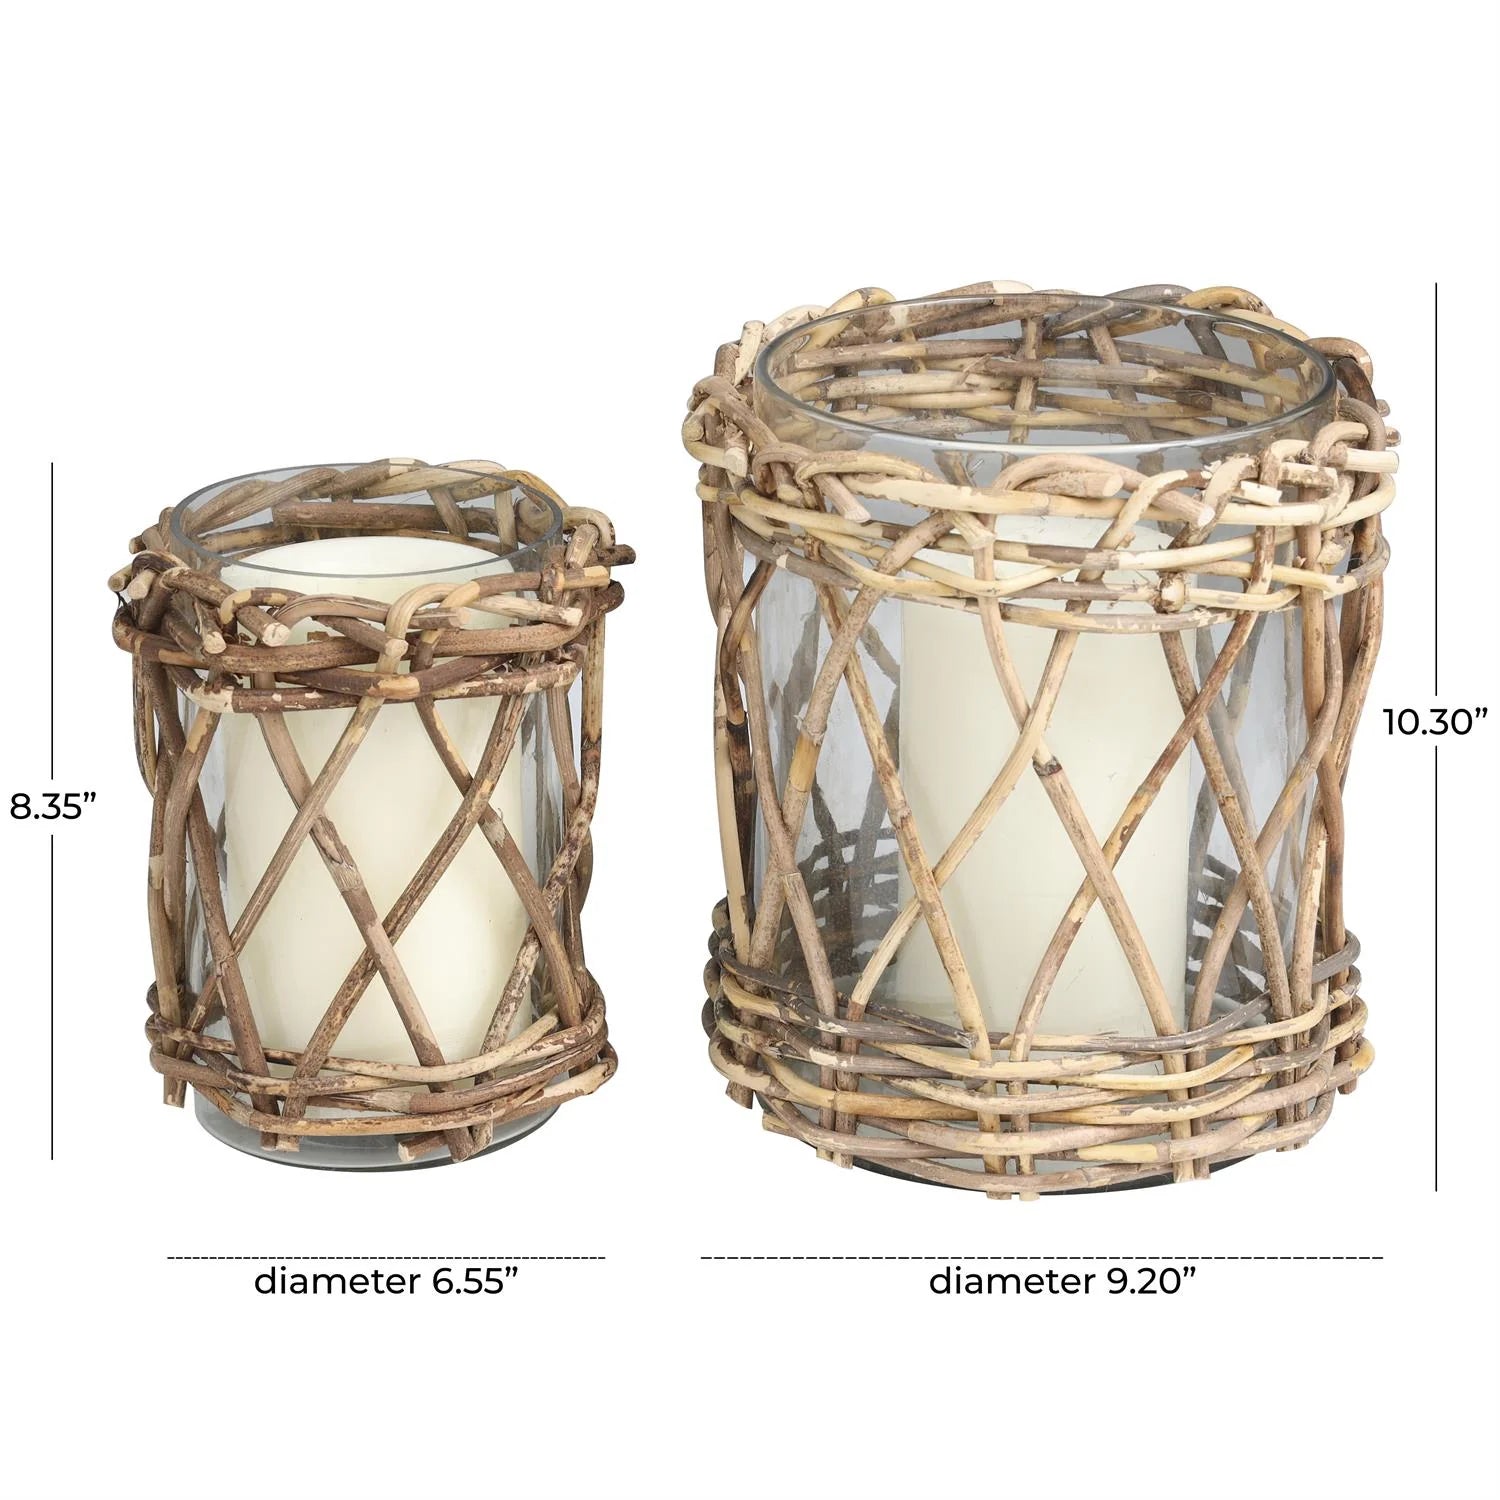 Glass Handmade Candle Holder with Woven Exterior Set of 2